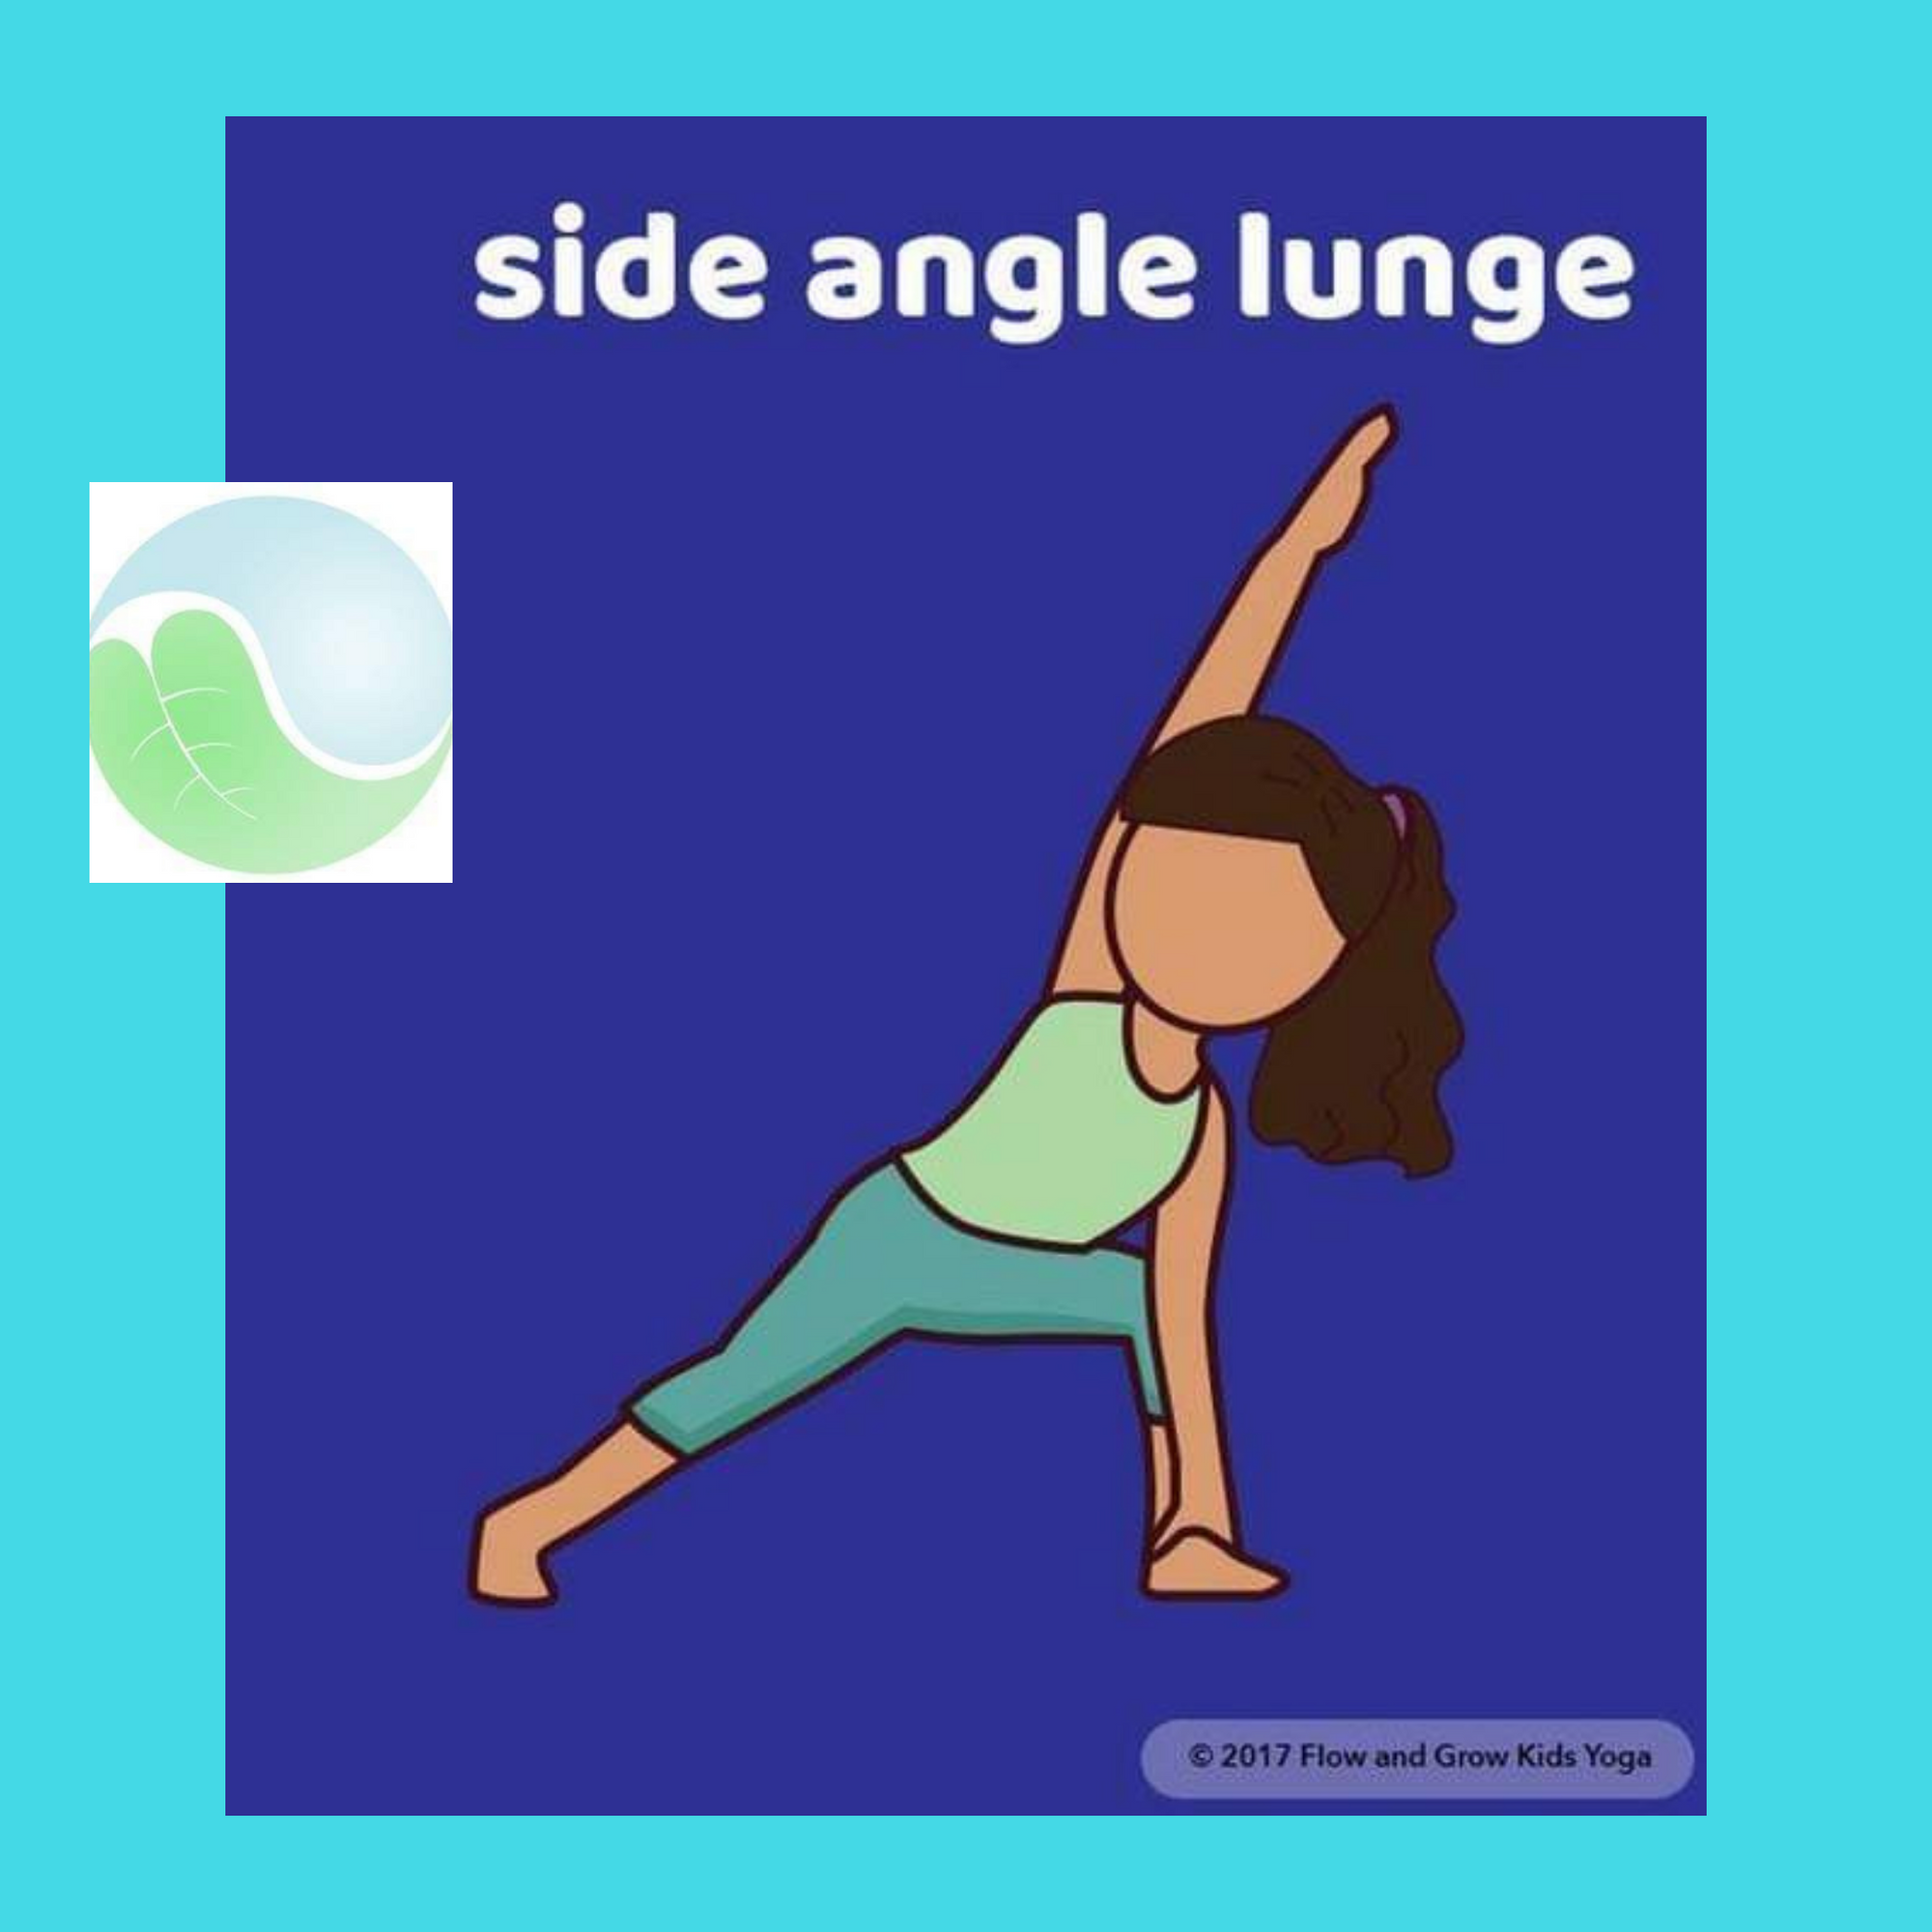 Opening Our Heart to Change -- Side Angle Lunge